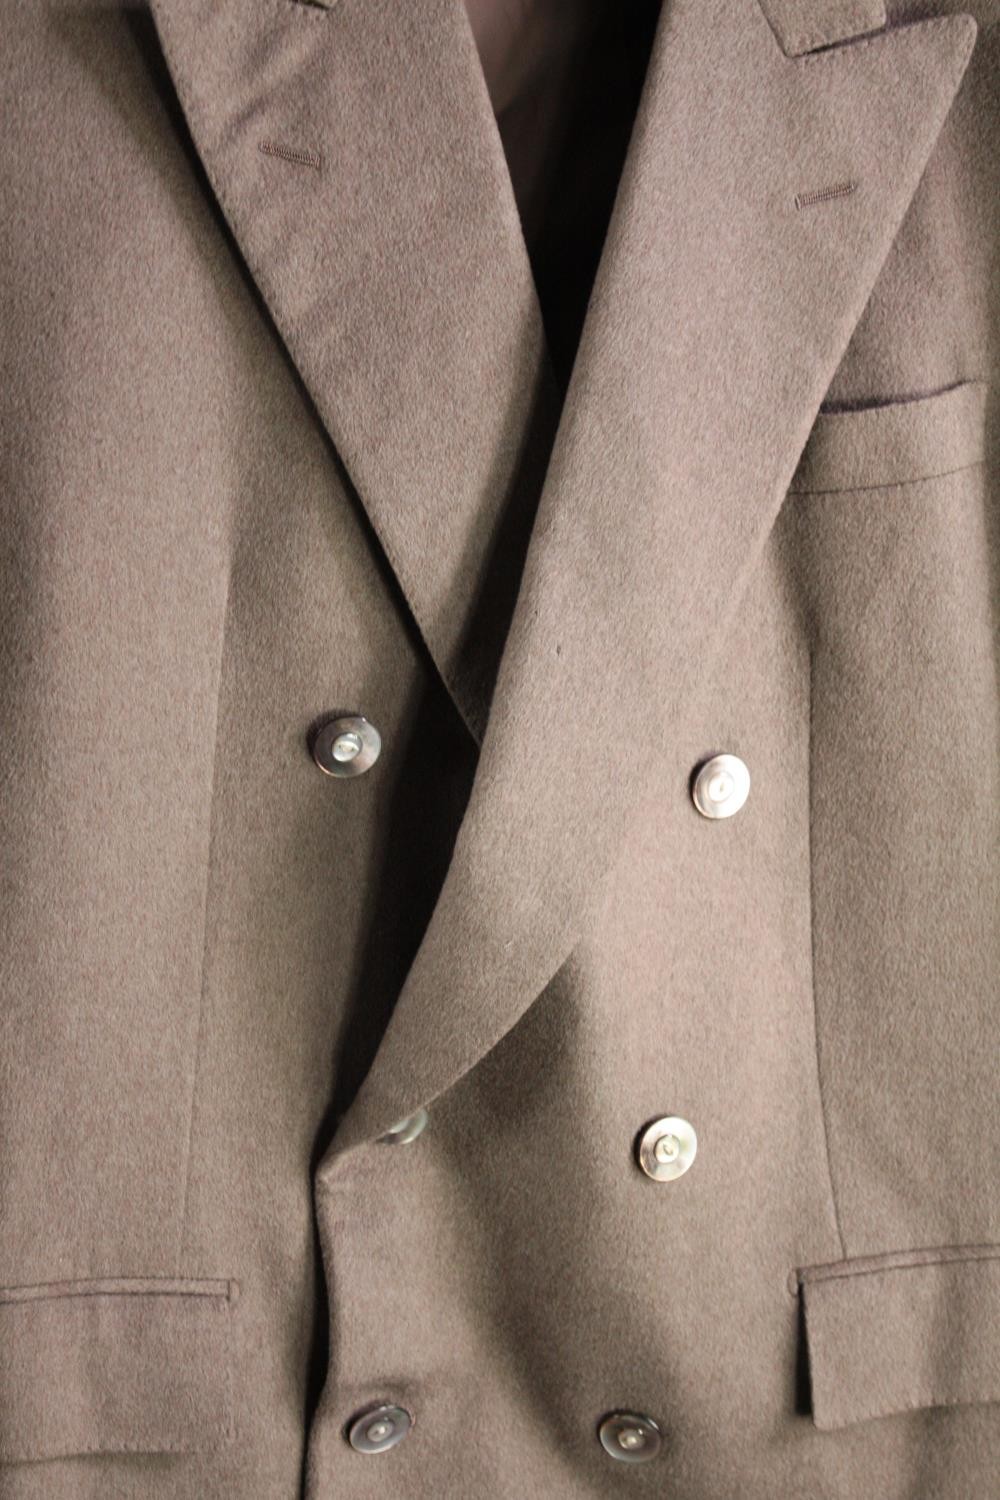 A bespoke made beige suit jacket with mother of pearl buttons. Saint Laurent label. - Image 2 of 6